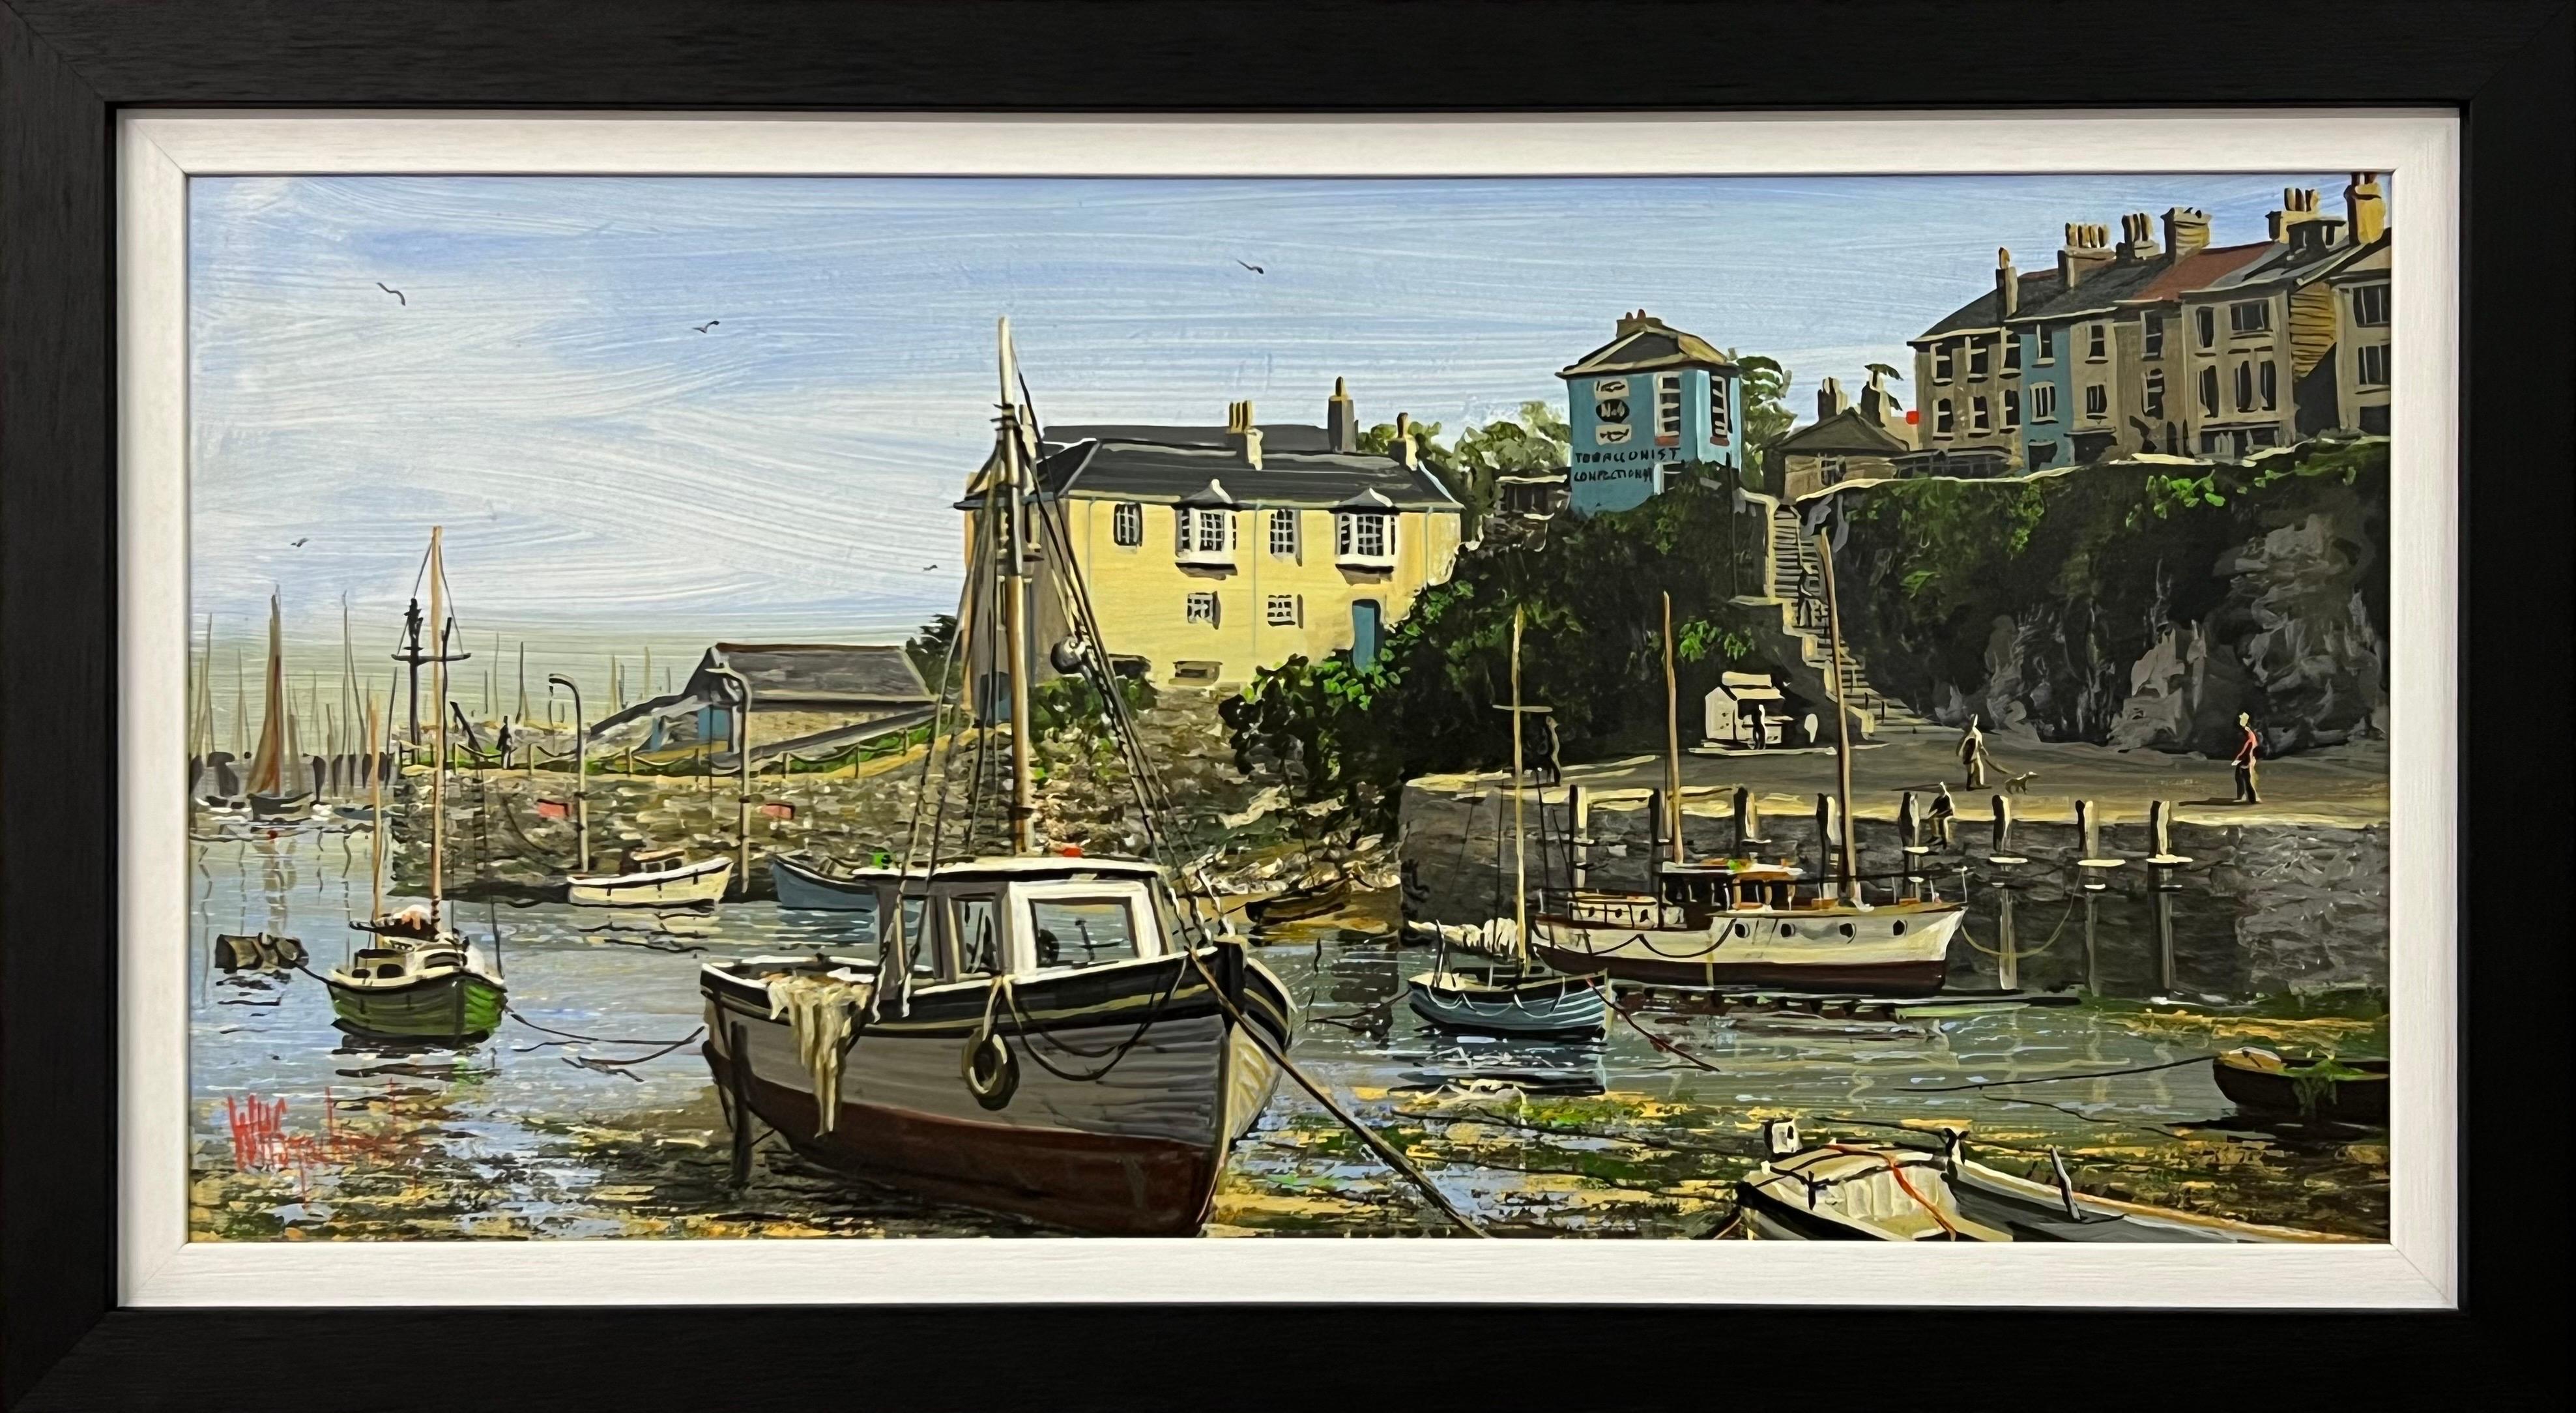 William Stockman Landscape Painting - Vintage 1970's Harbour Scene with Moored Boats & Figures by British Artist